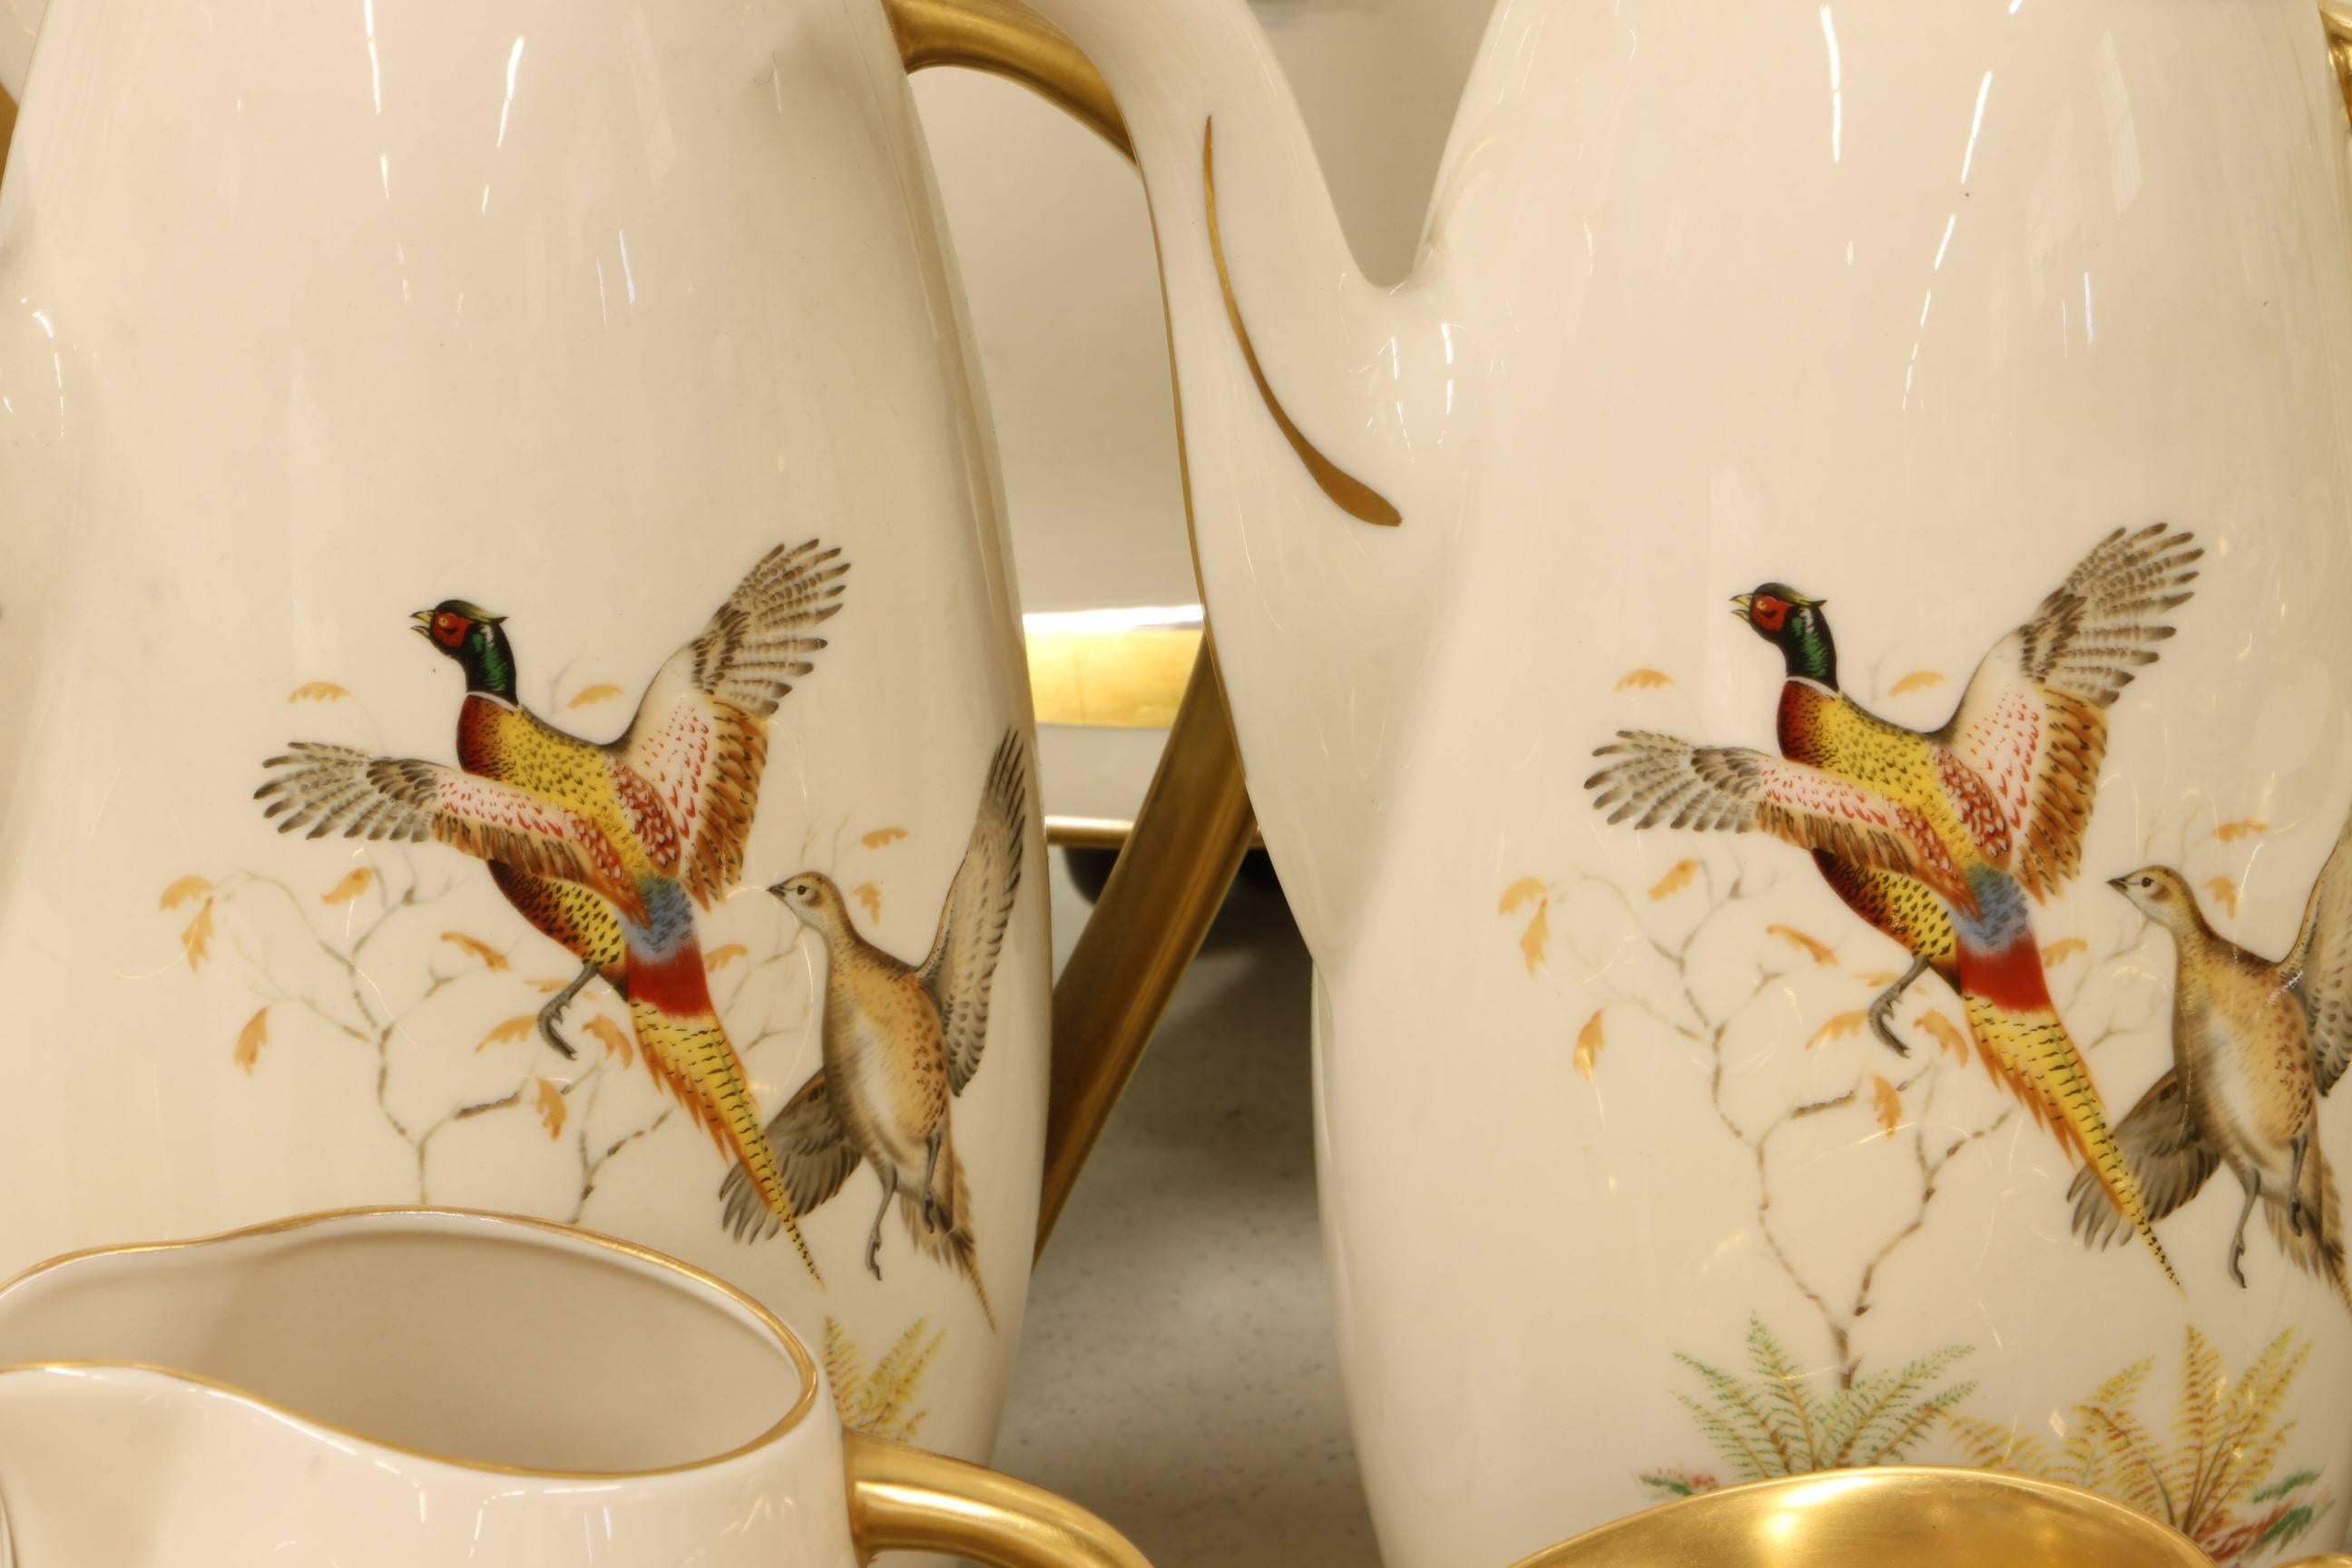 Rare and outstanding set of the "Game Birds" pattern dinnerware by Flintridge in excellent condition. Ivory background with thick gilt accent. The set includes: (16) 10.75 inch; dinner plates
(16) 8.5 inch salad/ luncheon plates
(16) 6.5